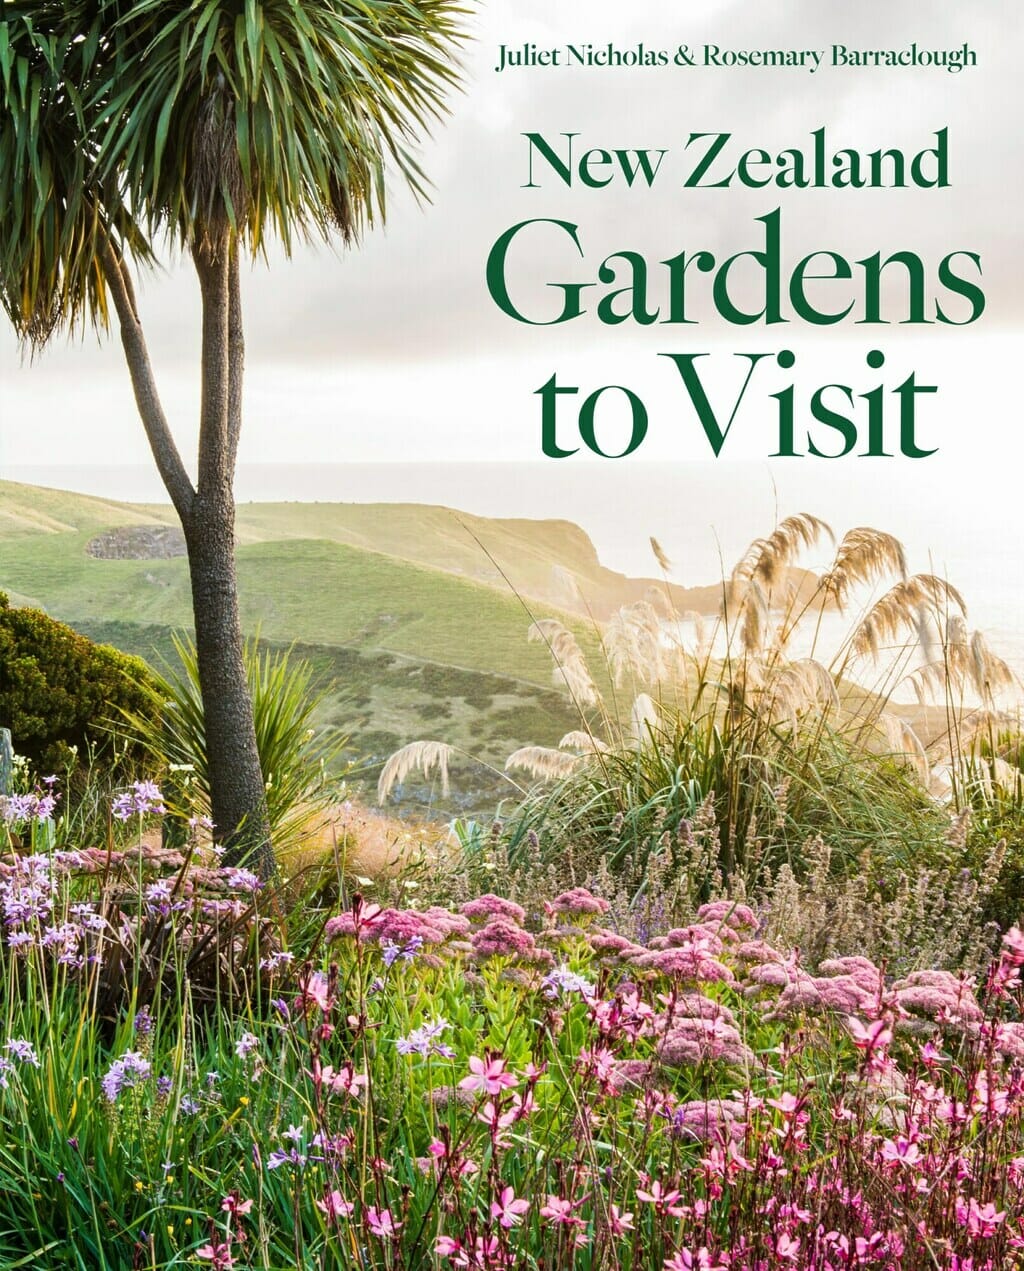 Book cover of 'New Zealand Gardens to Visit' by Rosemary Barraclough and Juliet Nicholas